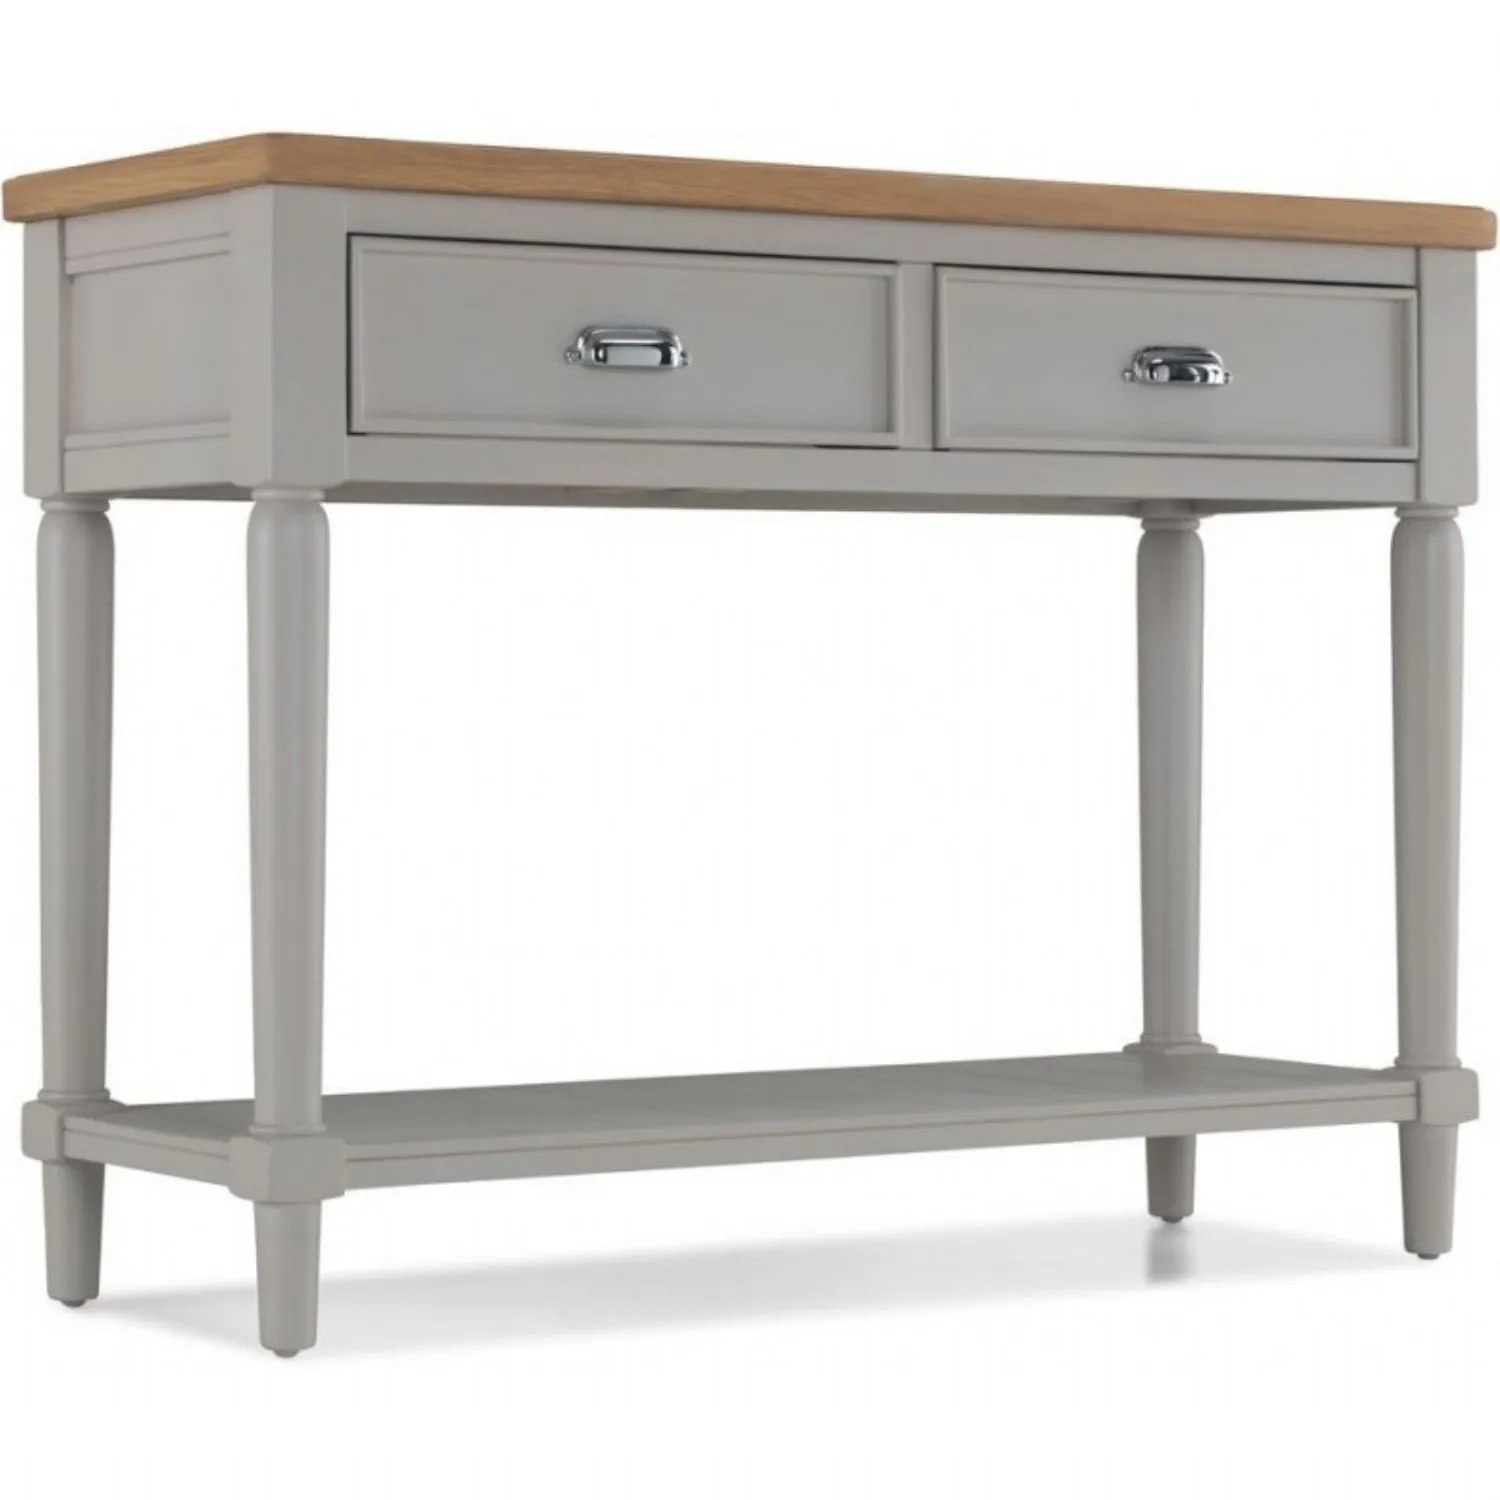 Newbury Oak And Grey Painted 2 Drawer Console Table